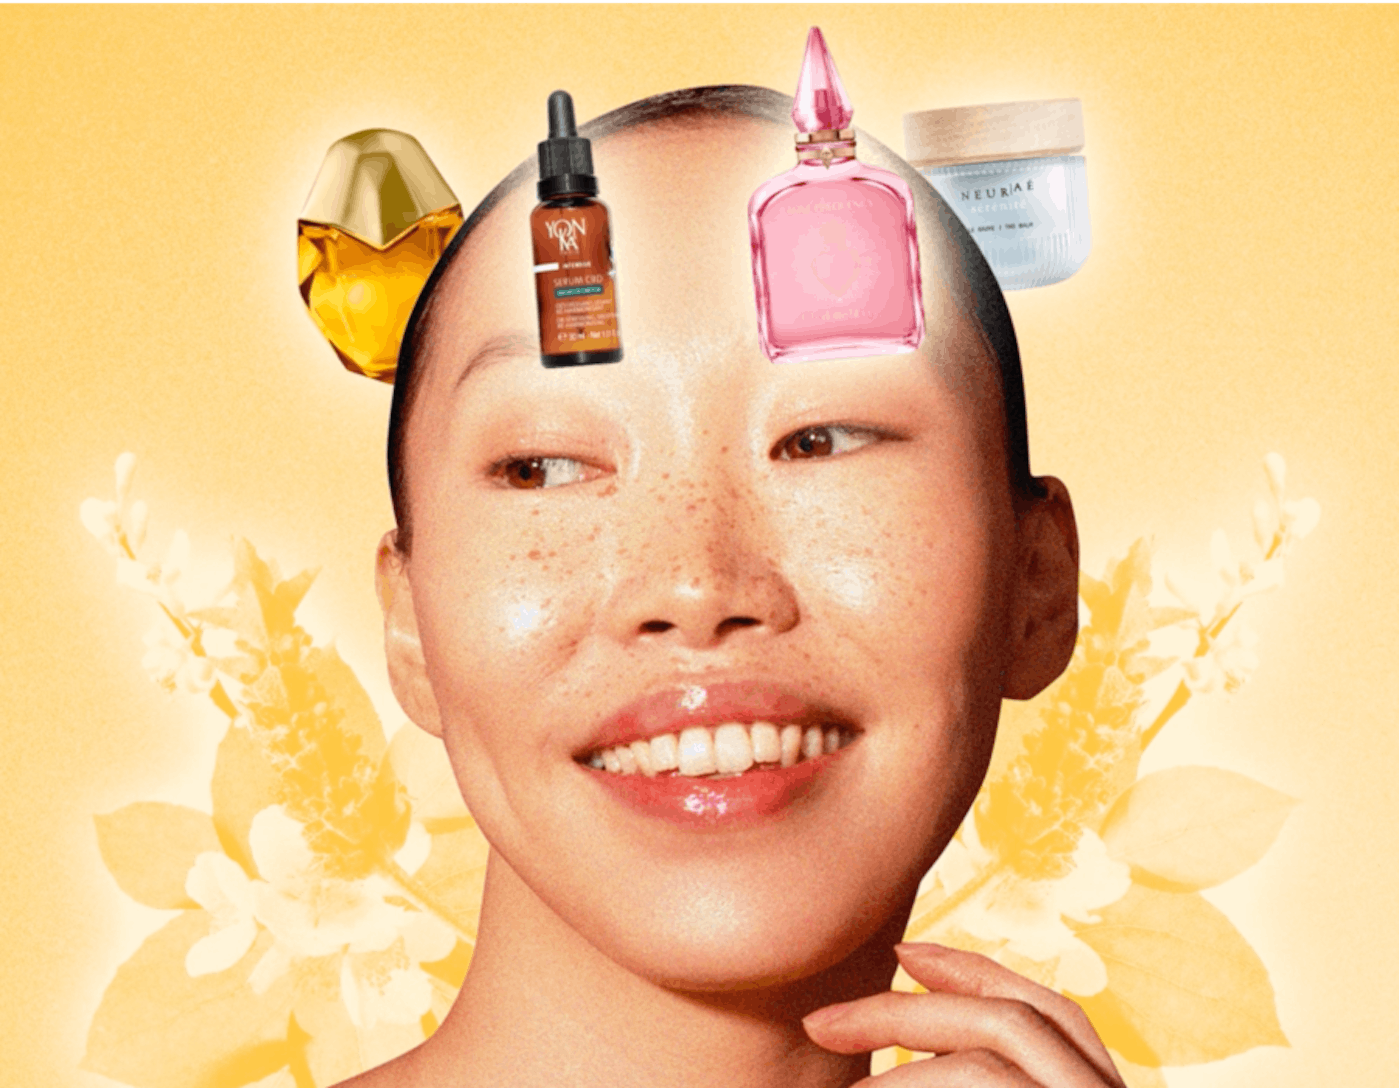 Asian woman smiling with various beauty products floating around her head against a floral backdrop.